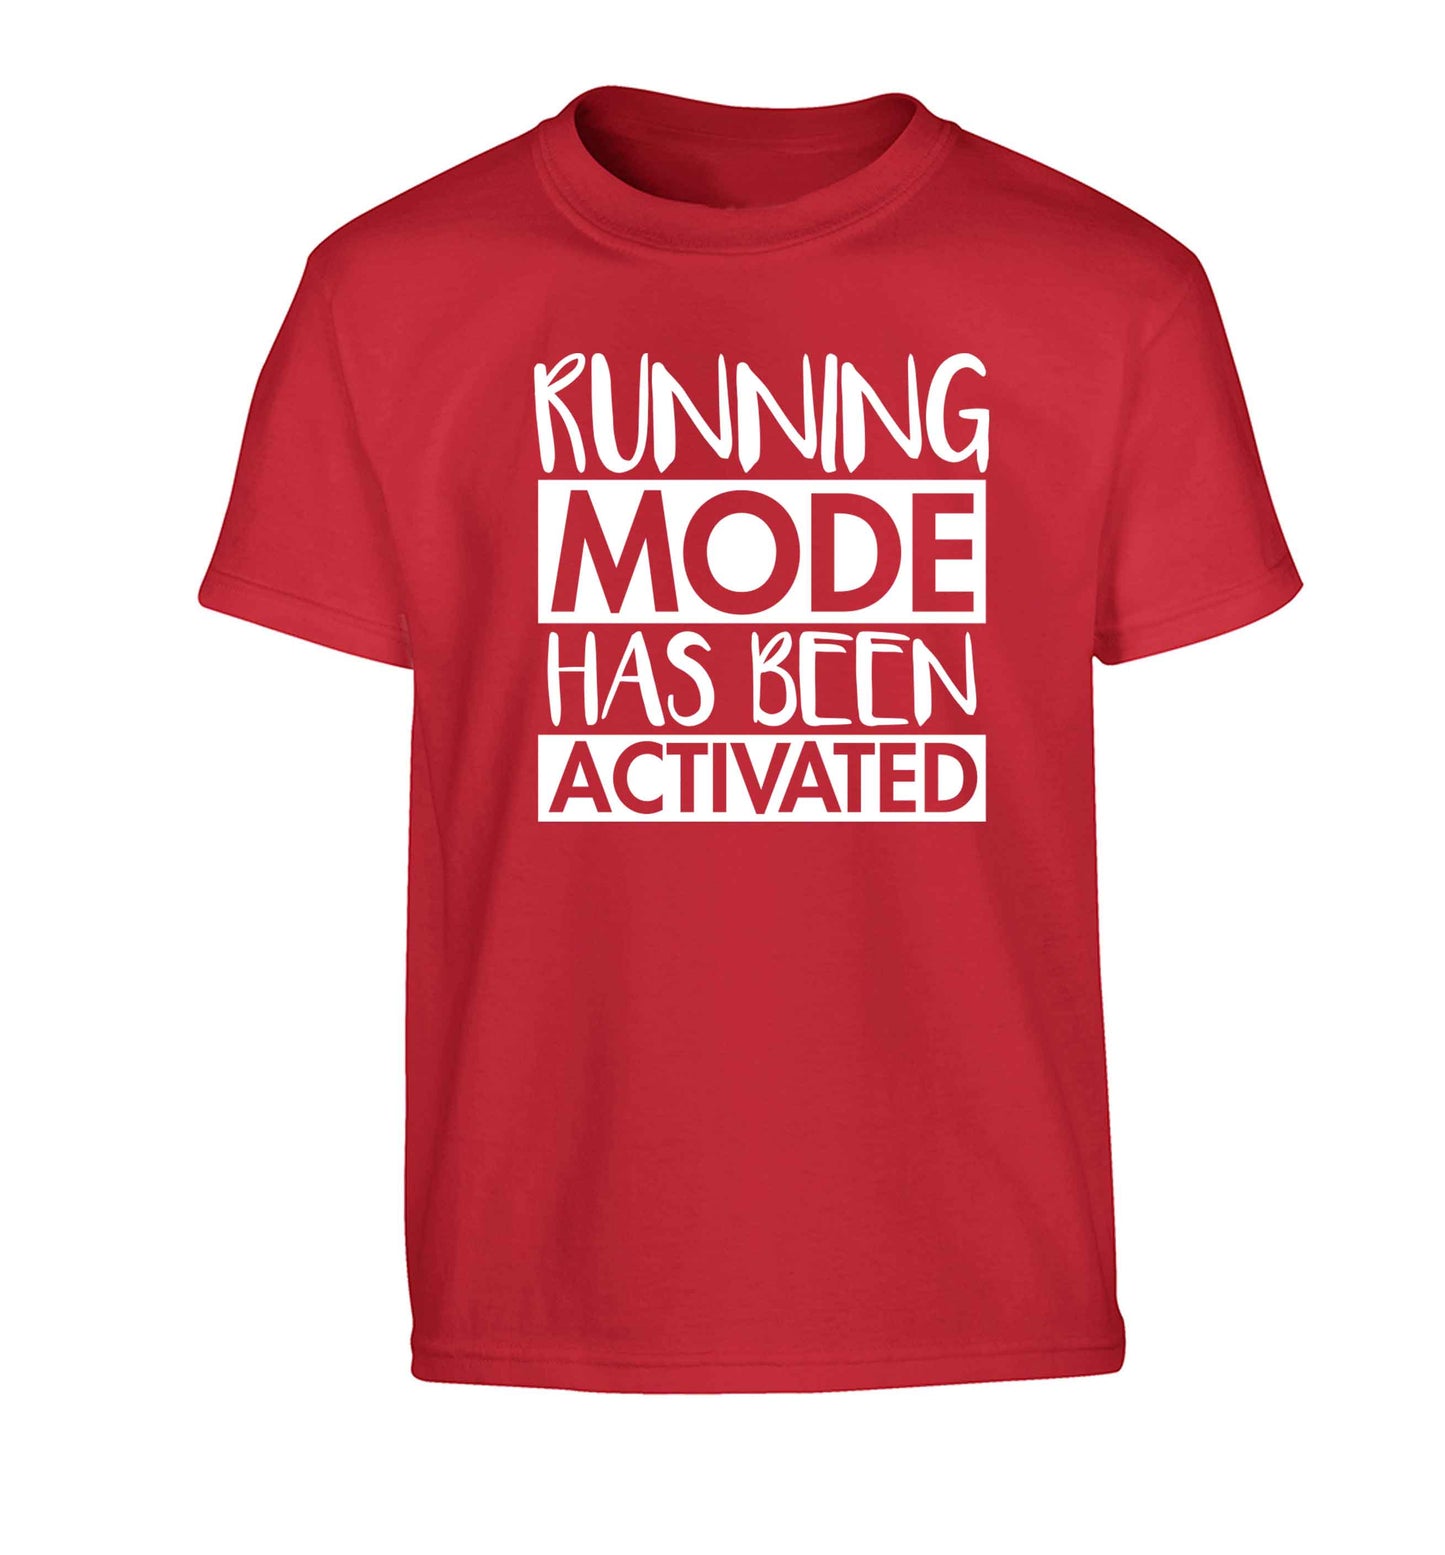 Running mode has been activated Children's red Tshirt 12-13 Years